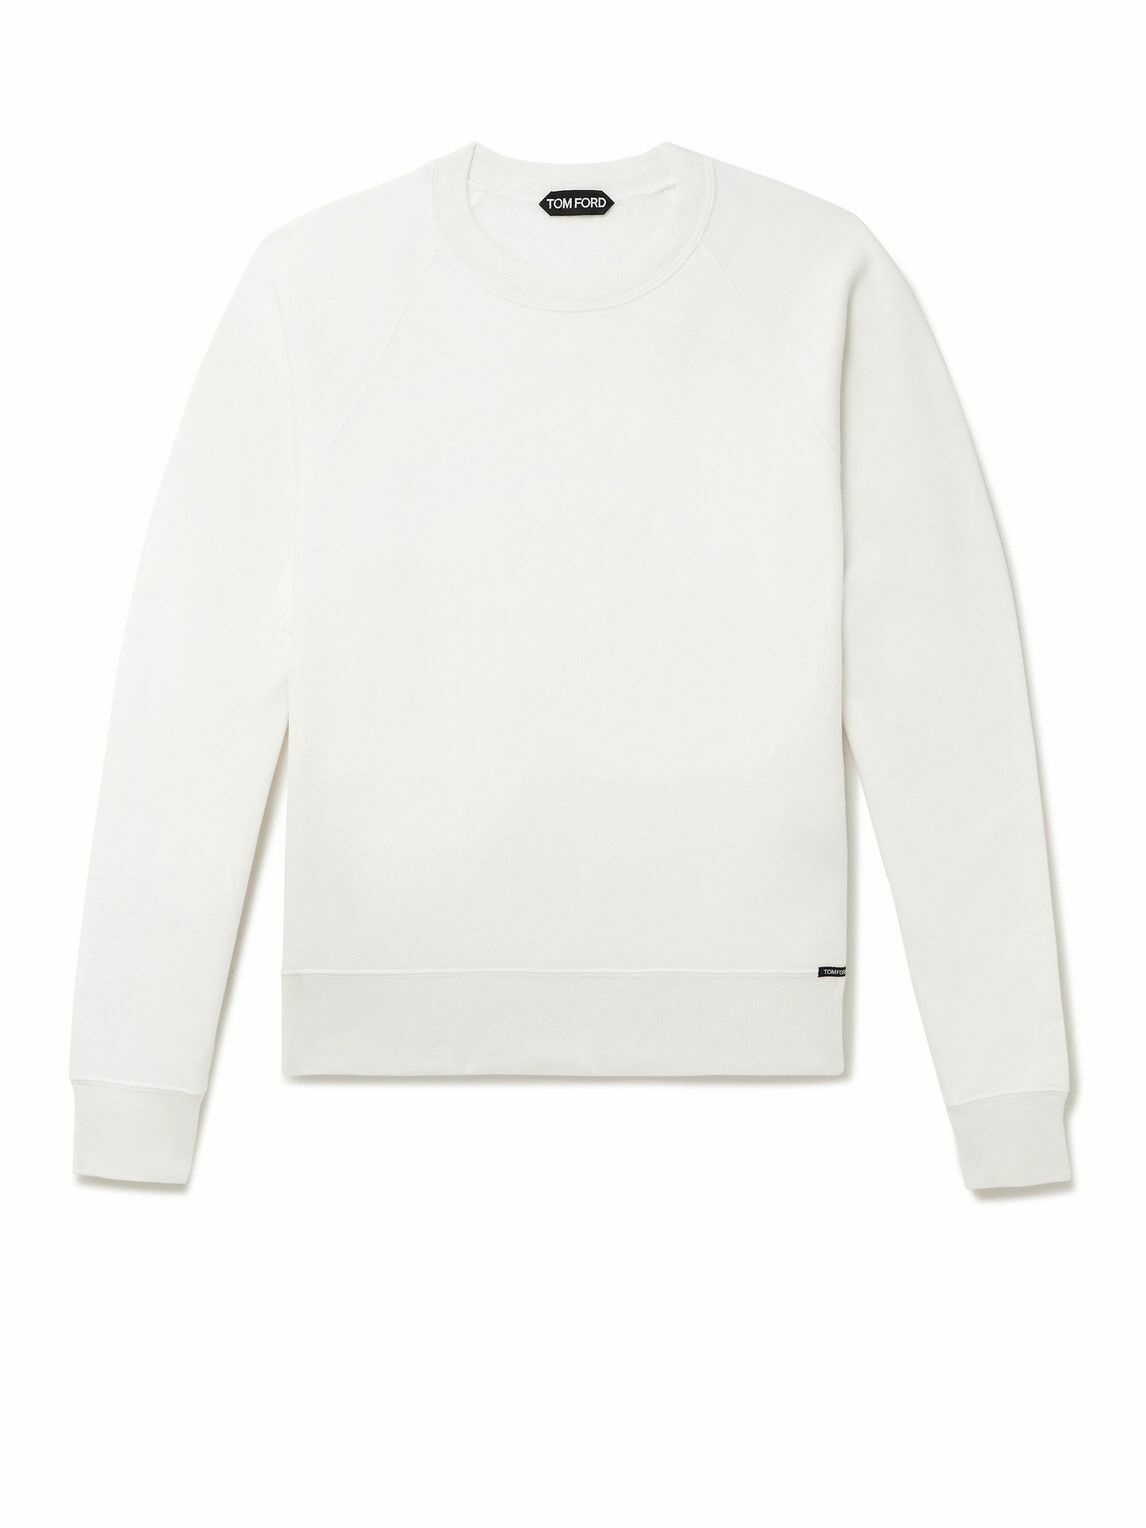 TOM FORD - Garment-Dyed Cotton-Jersey Sweatshirt - White TOM FORD